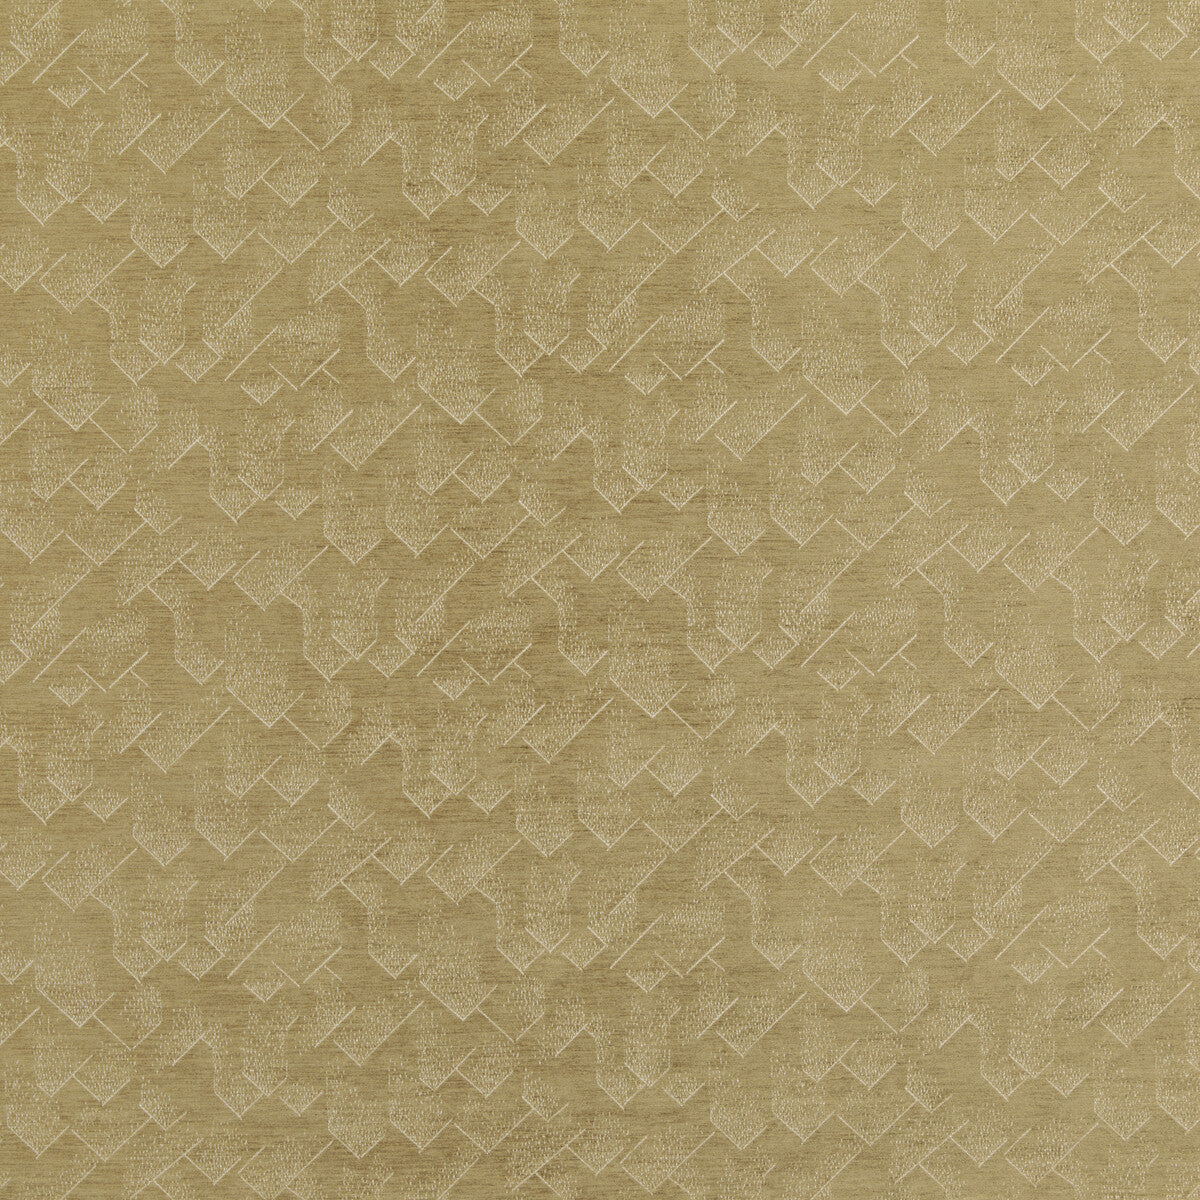 Brink fabric in bronze/tusk color - pattern GWF-3733.401.0 - by Lee Jofa Modern in the Kelly Wearstler IV collection